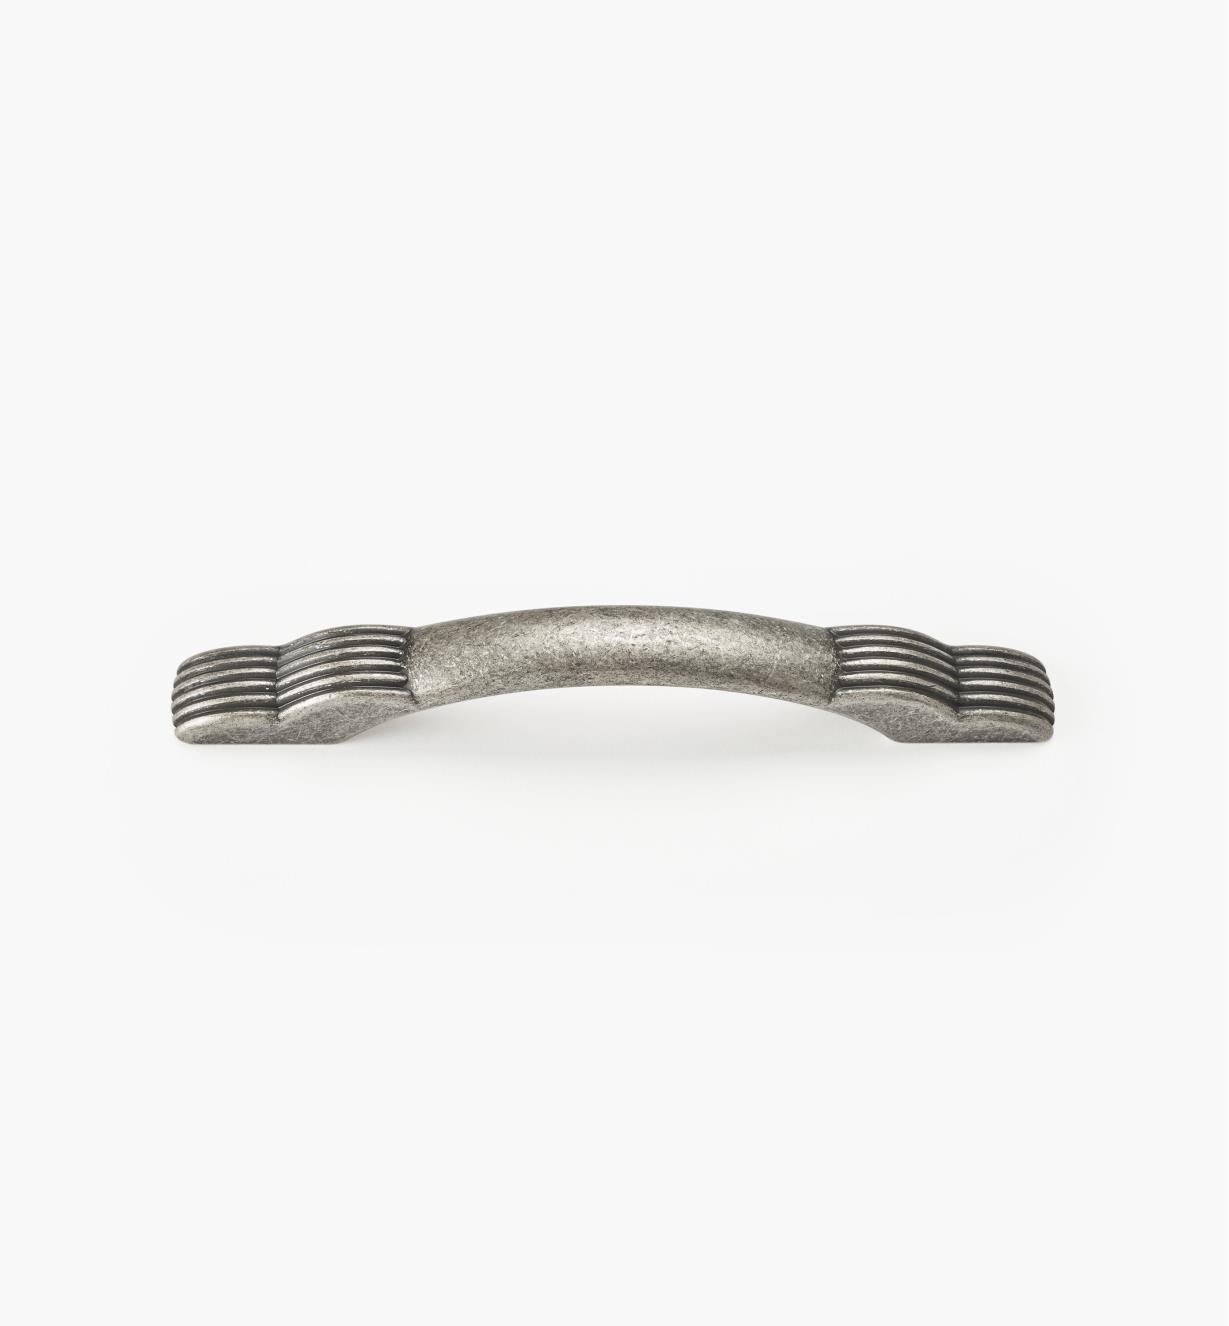 00A7096 - 160mm Handle (7 3/4")